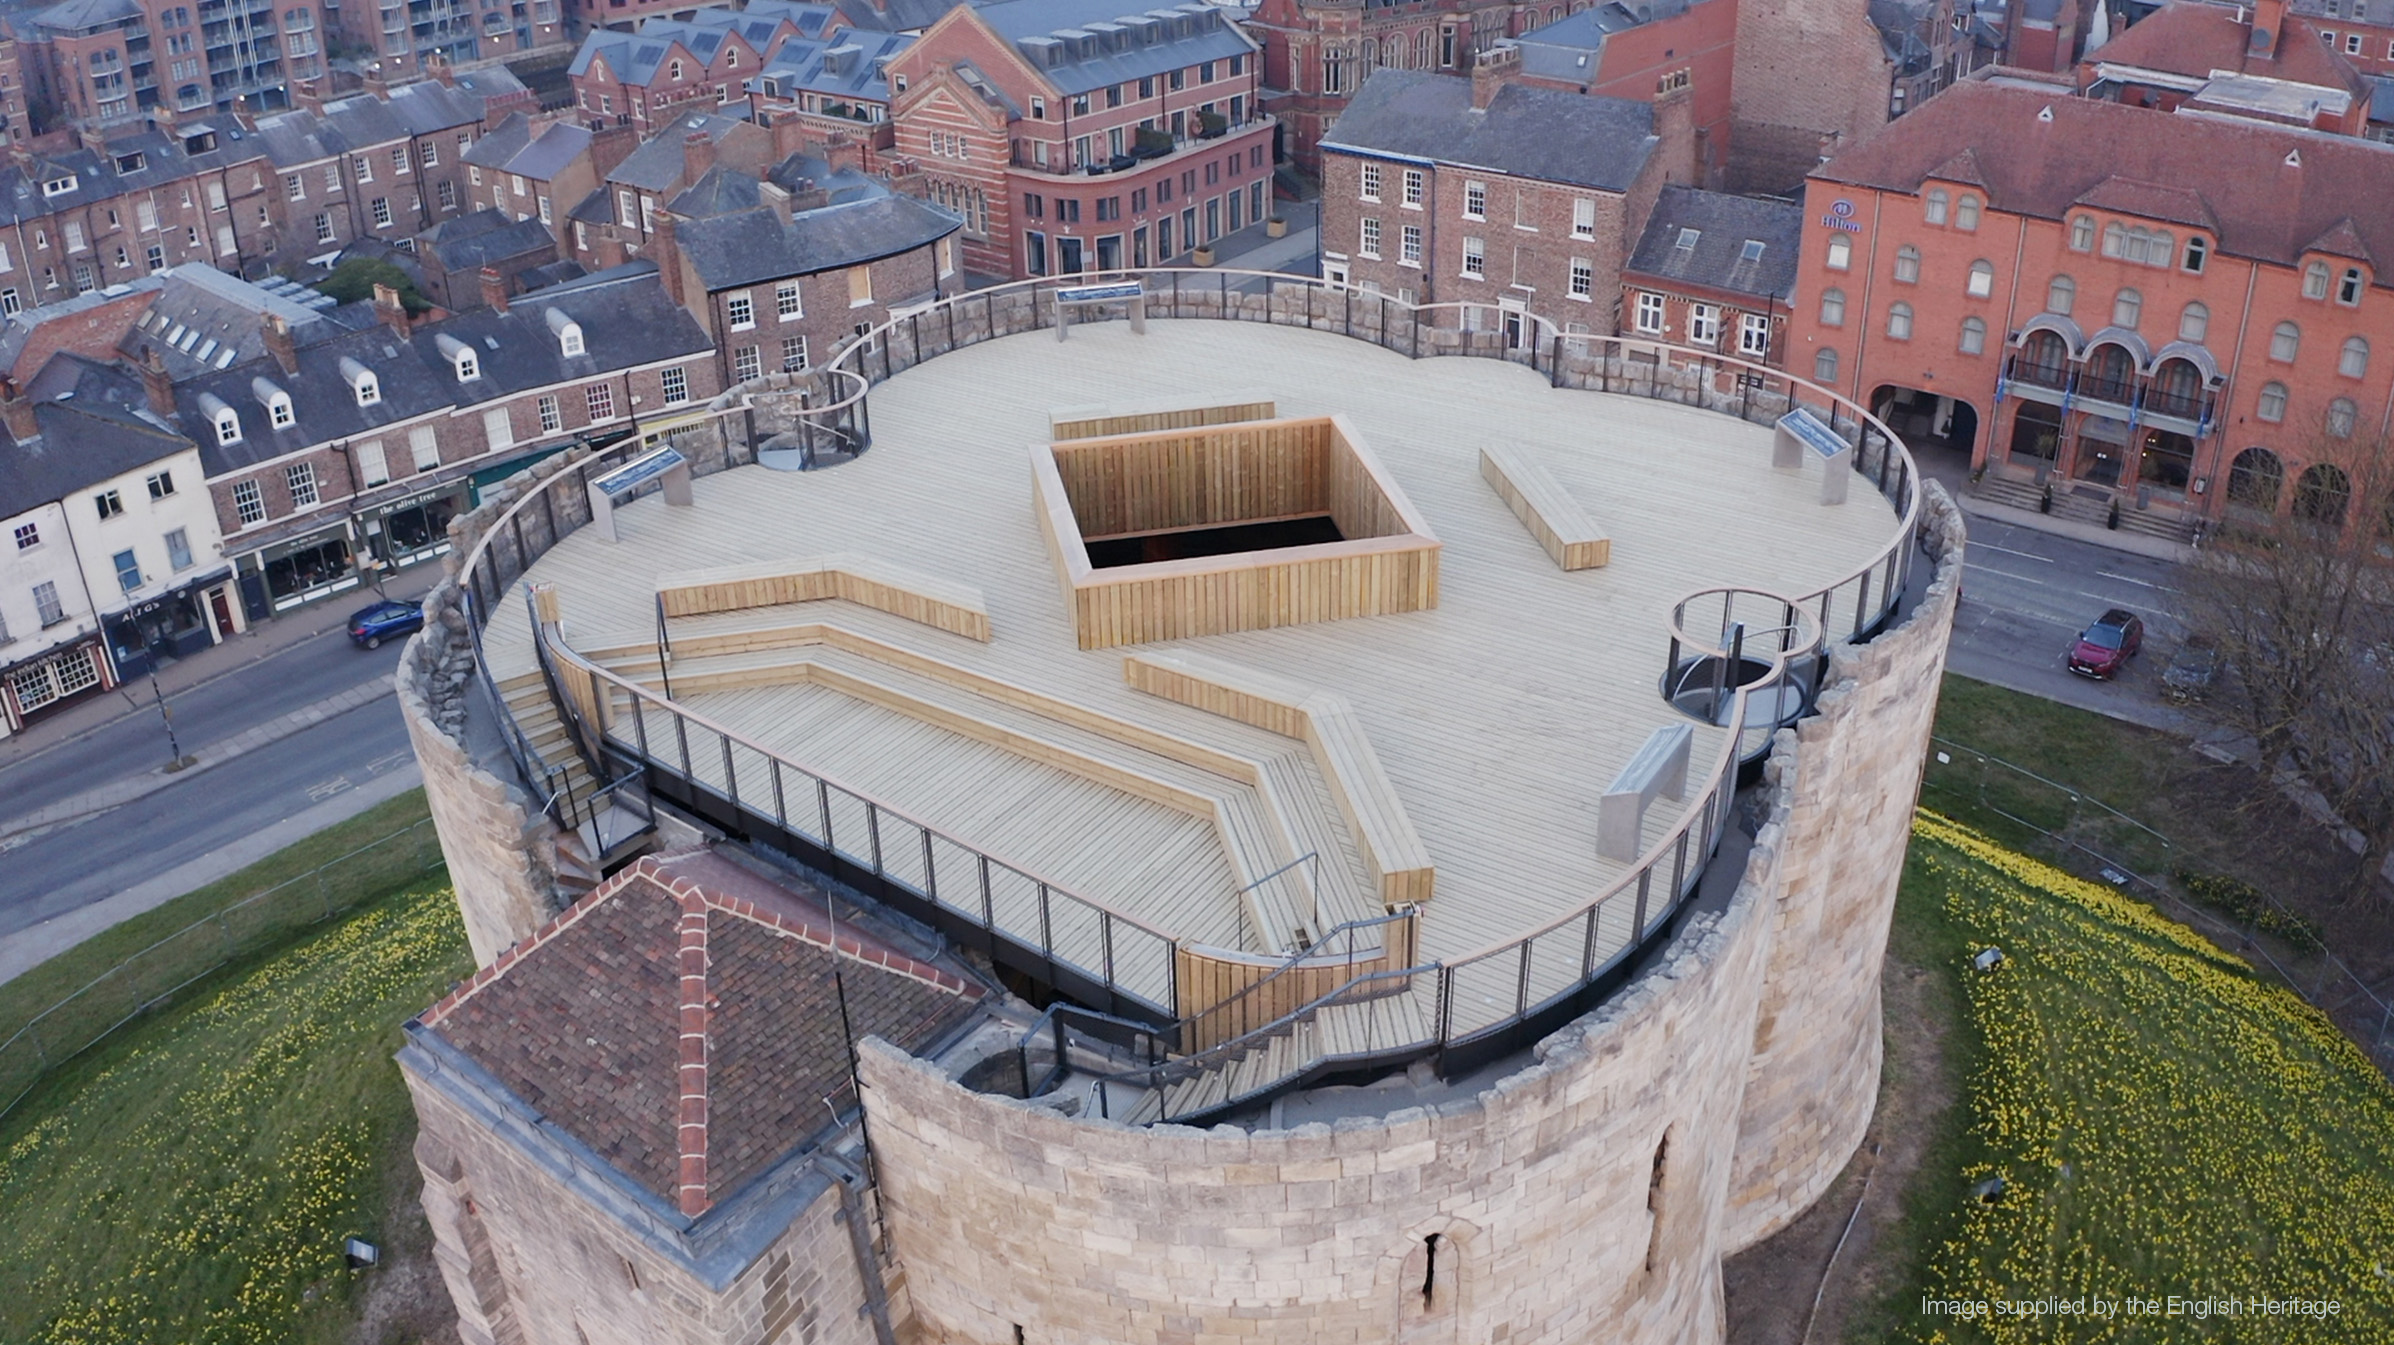 Non-Slip Timber Decking Used To Construct Roof Deck At Historic Clifford’s Tower In York